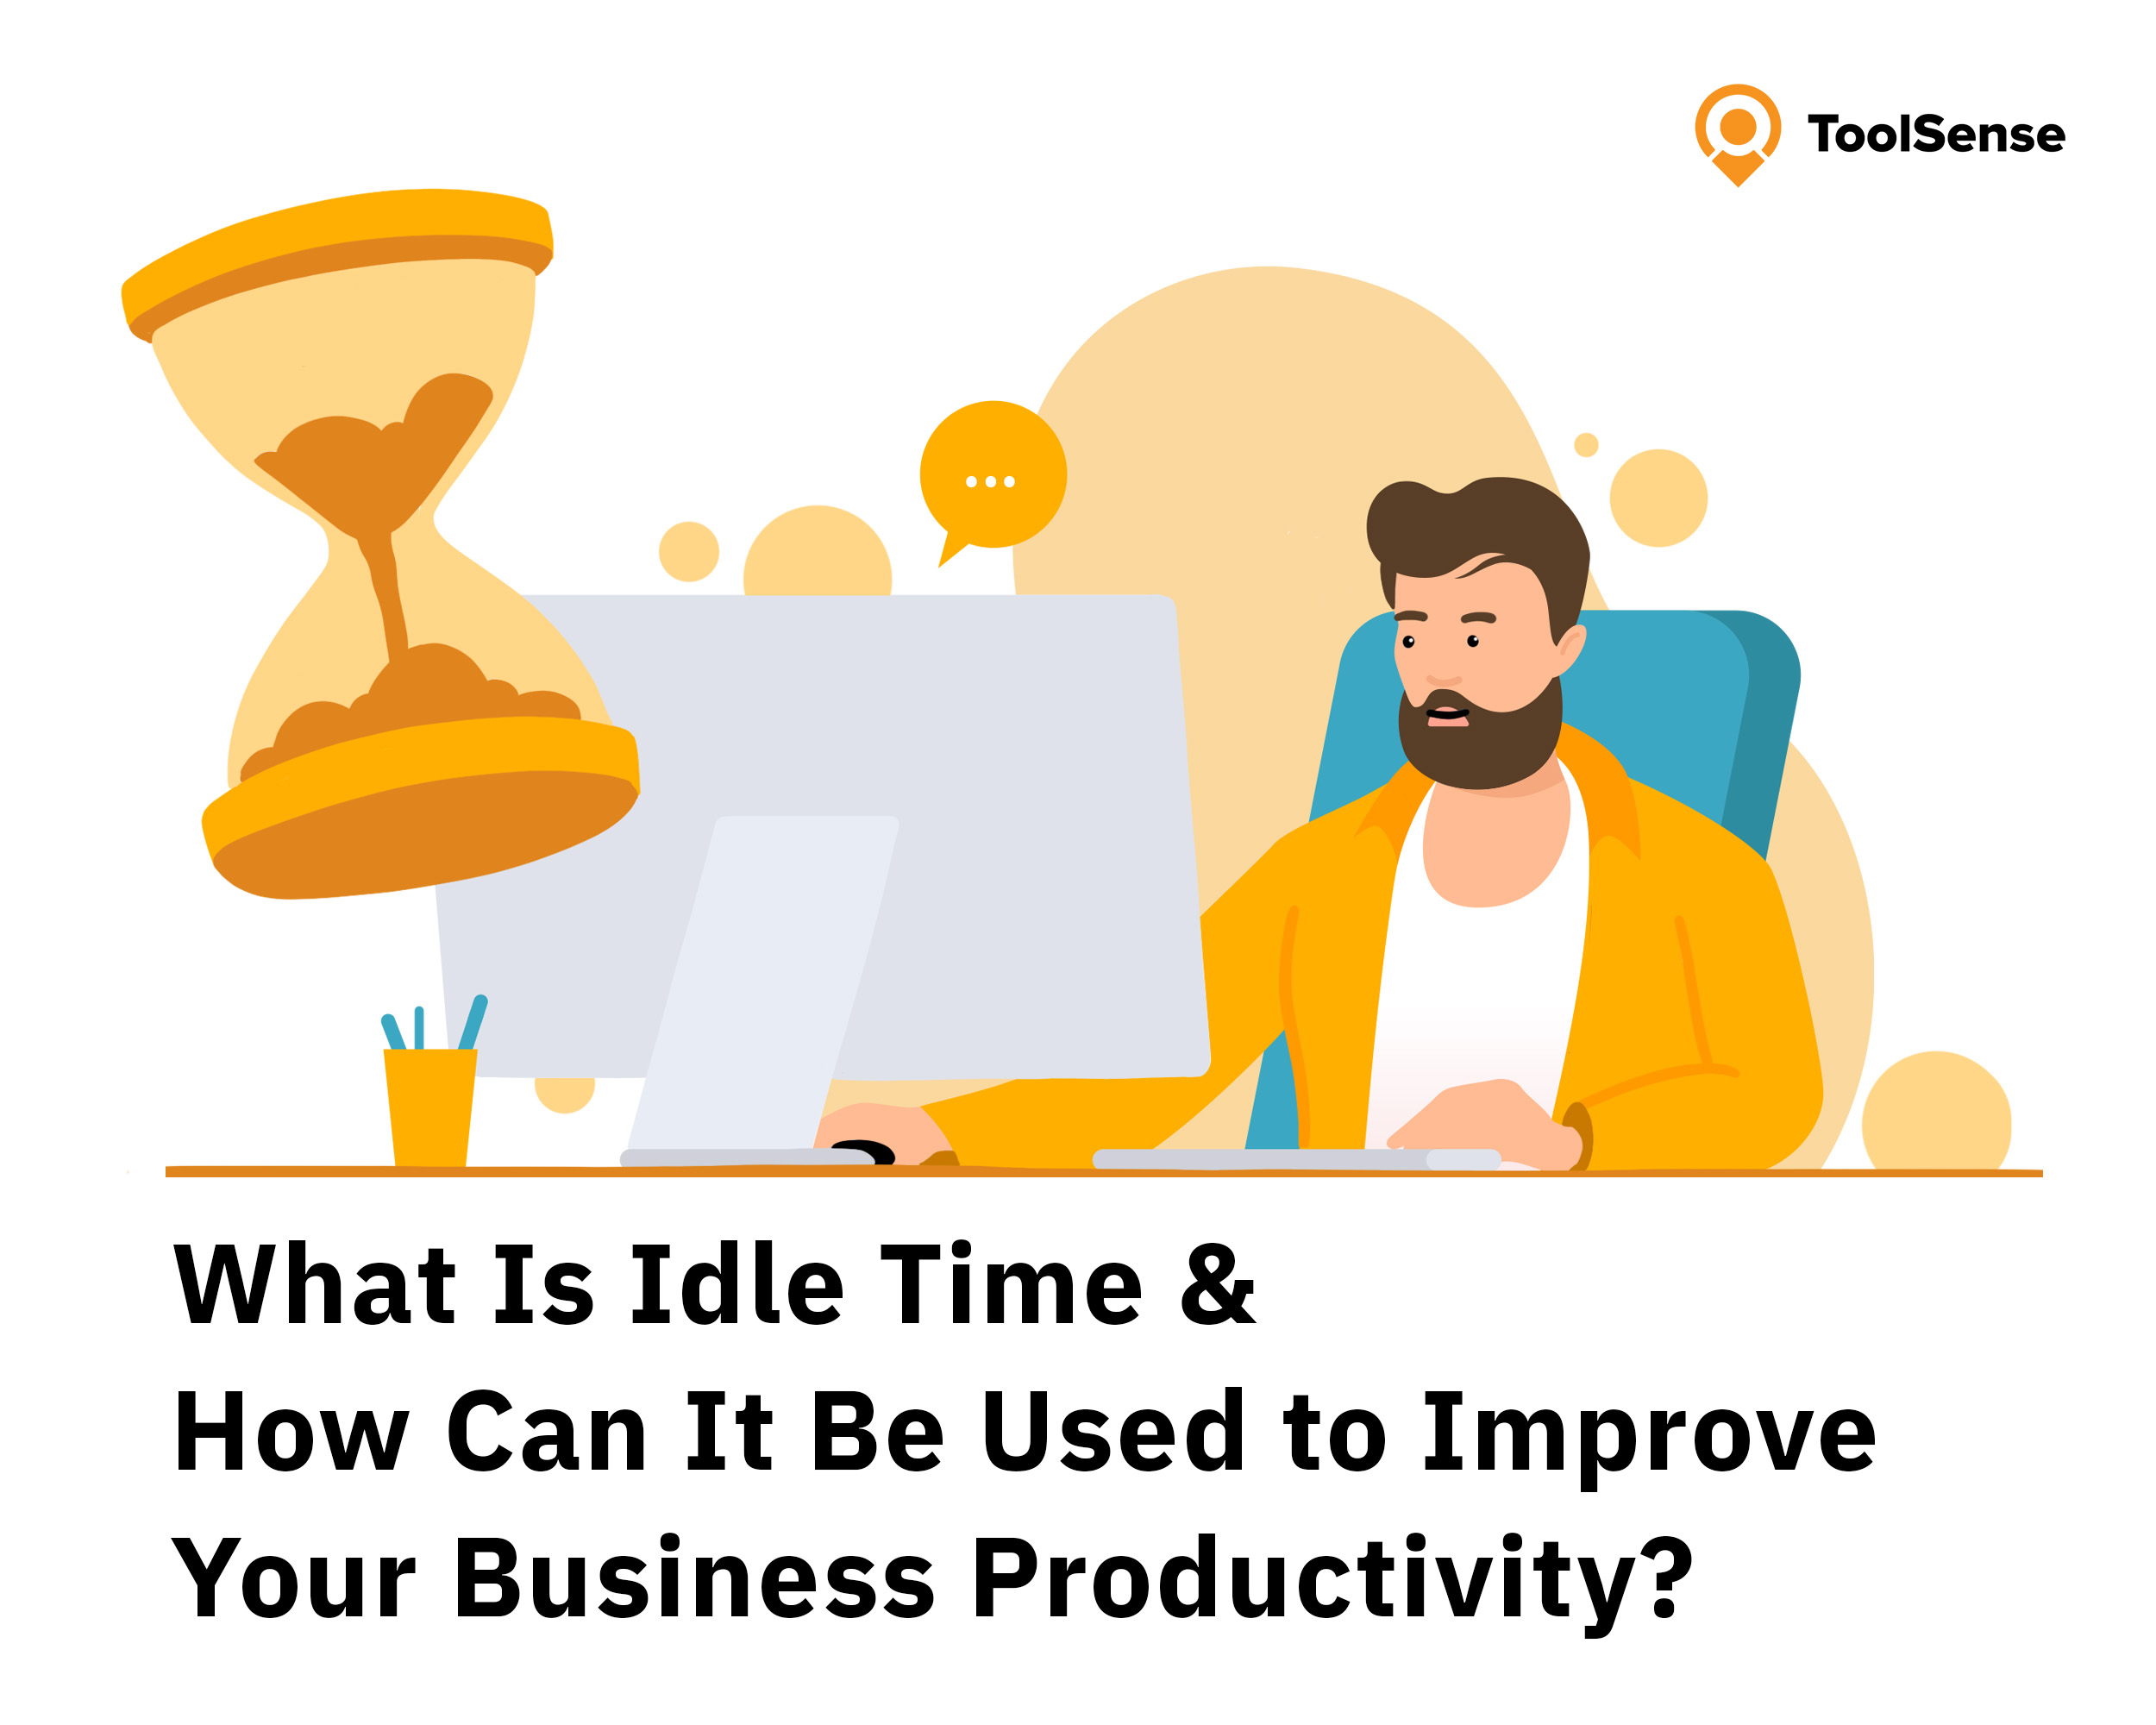 Idle Time: Definition, Difference to Downtime and How to Calculate It